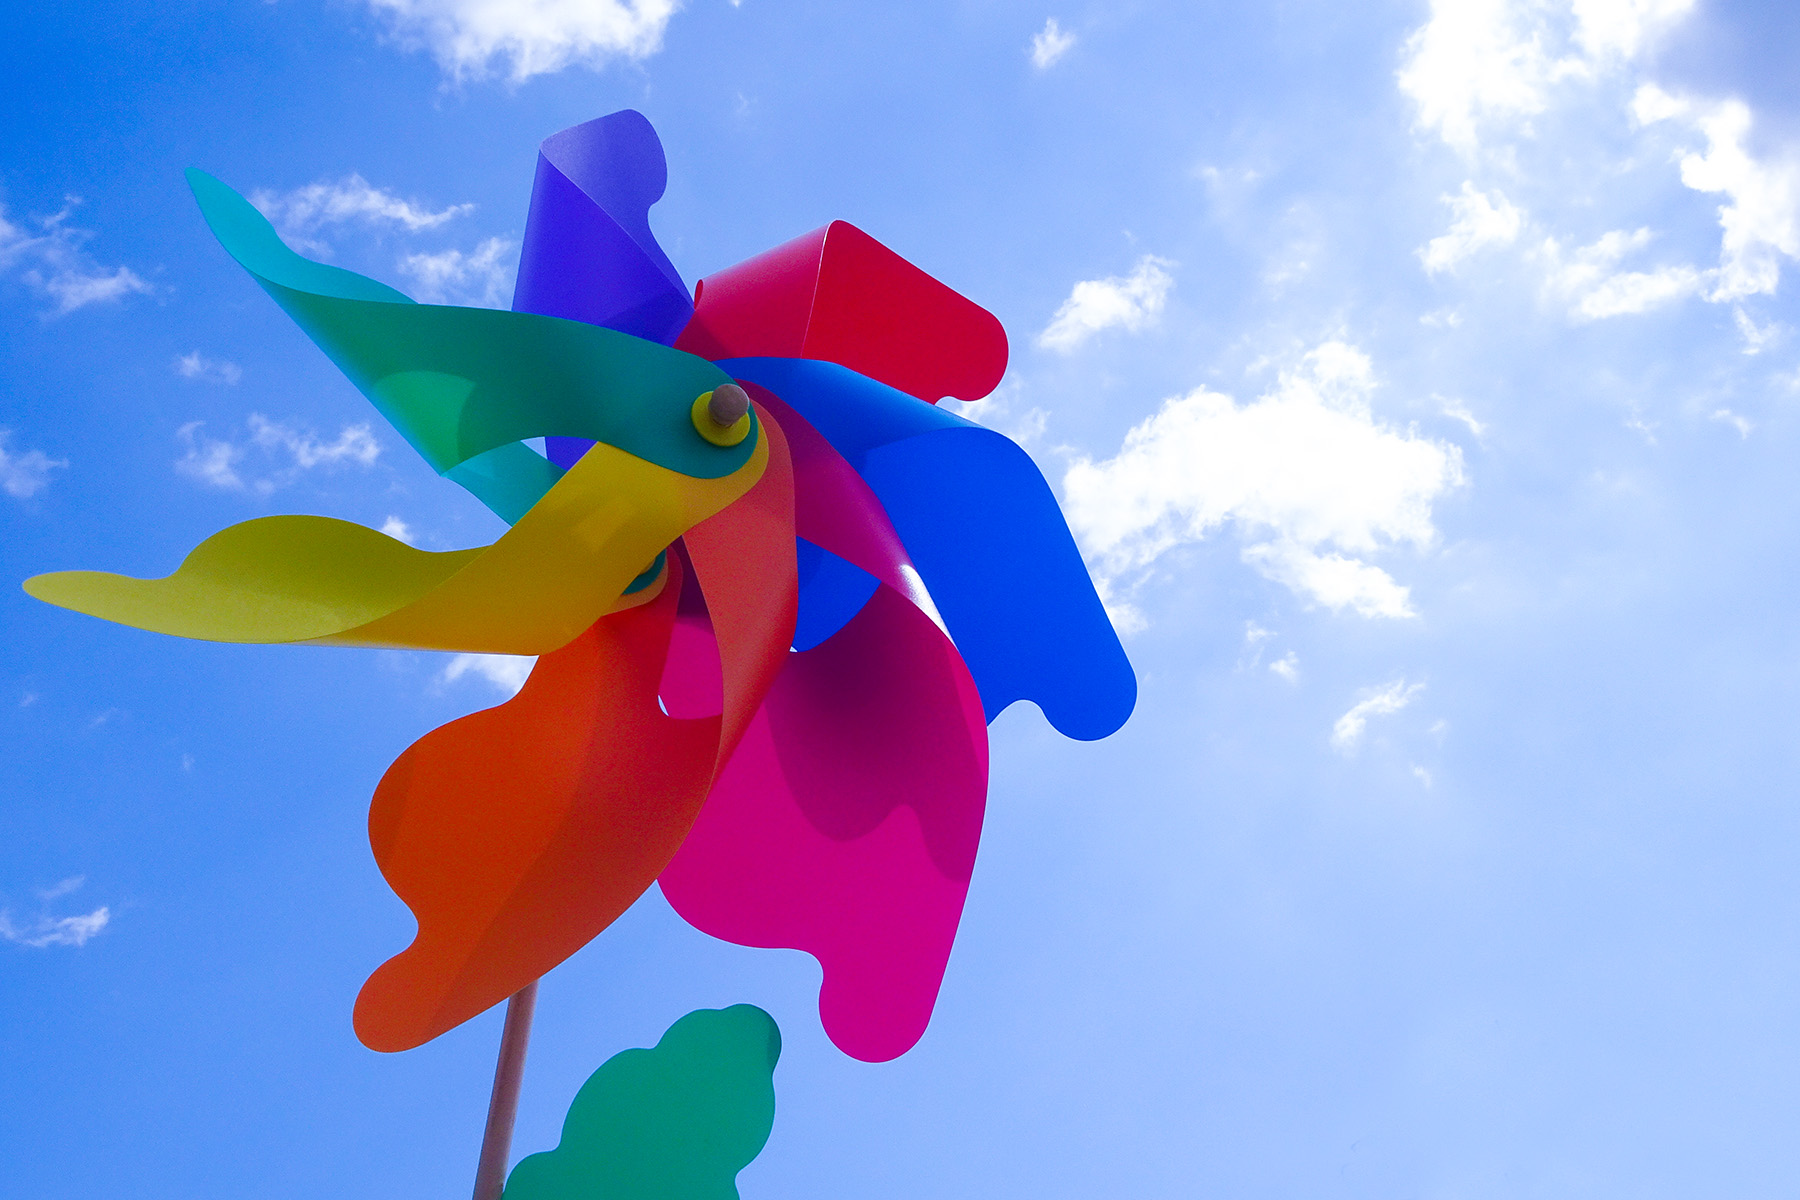 An image of a brightly colored pinwheel under blue skies. The pinwheel, a small lawn ornament that catches the wind and spins, is meant to convey the idea of extremely local weather, like the weather in your backyard.